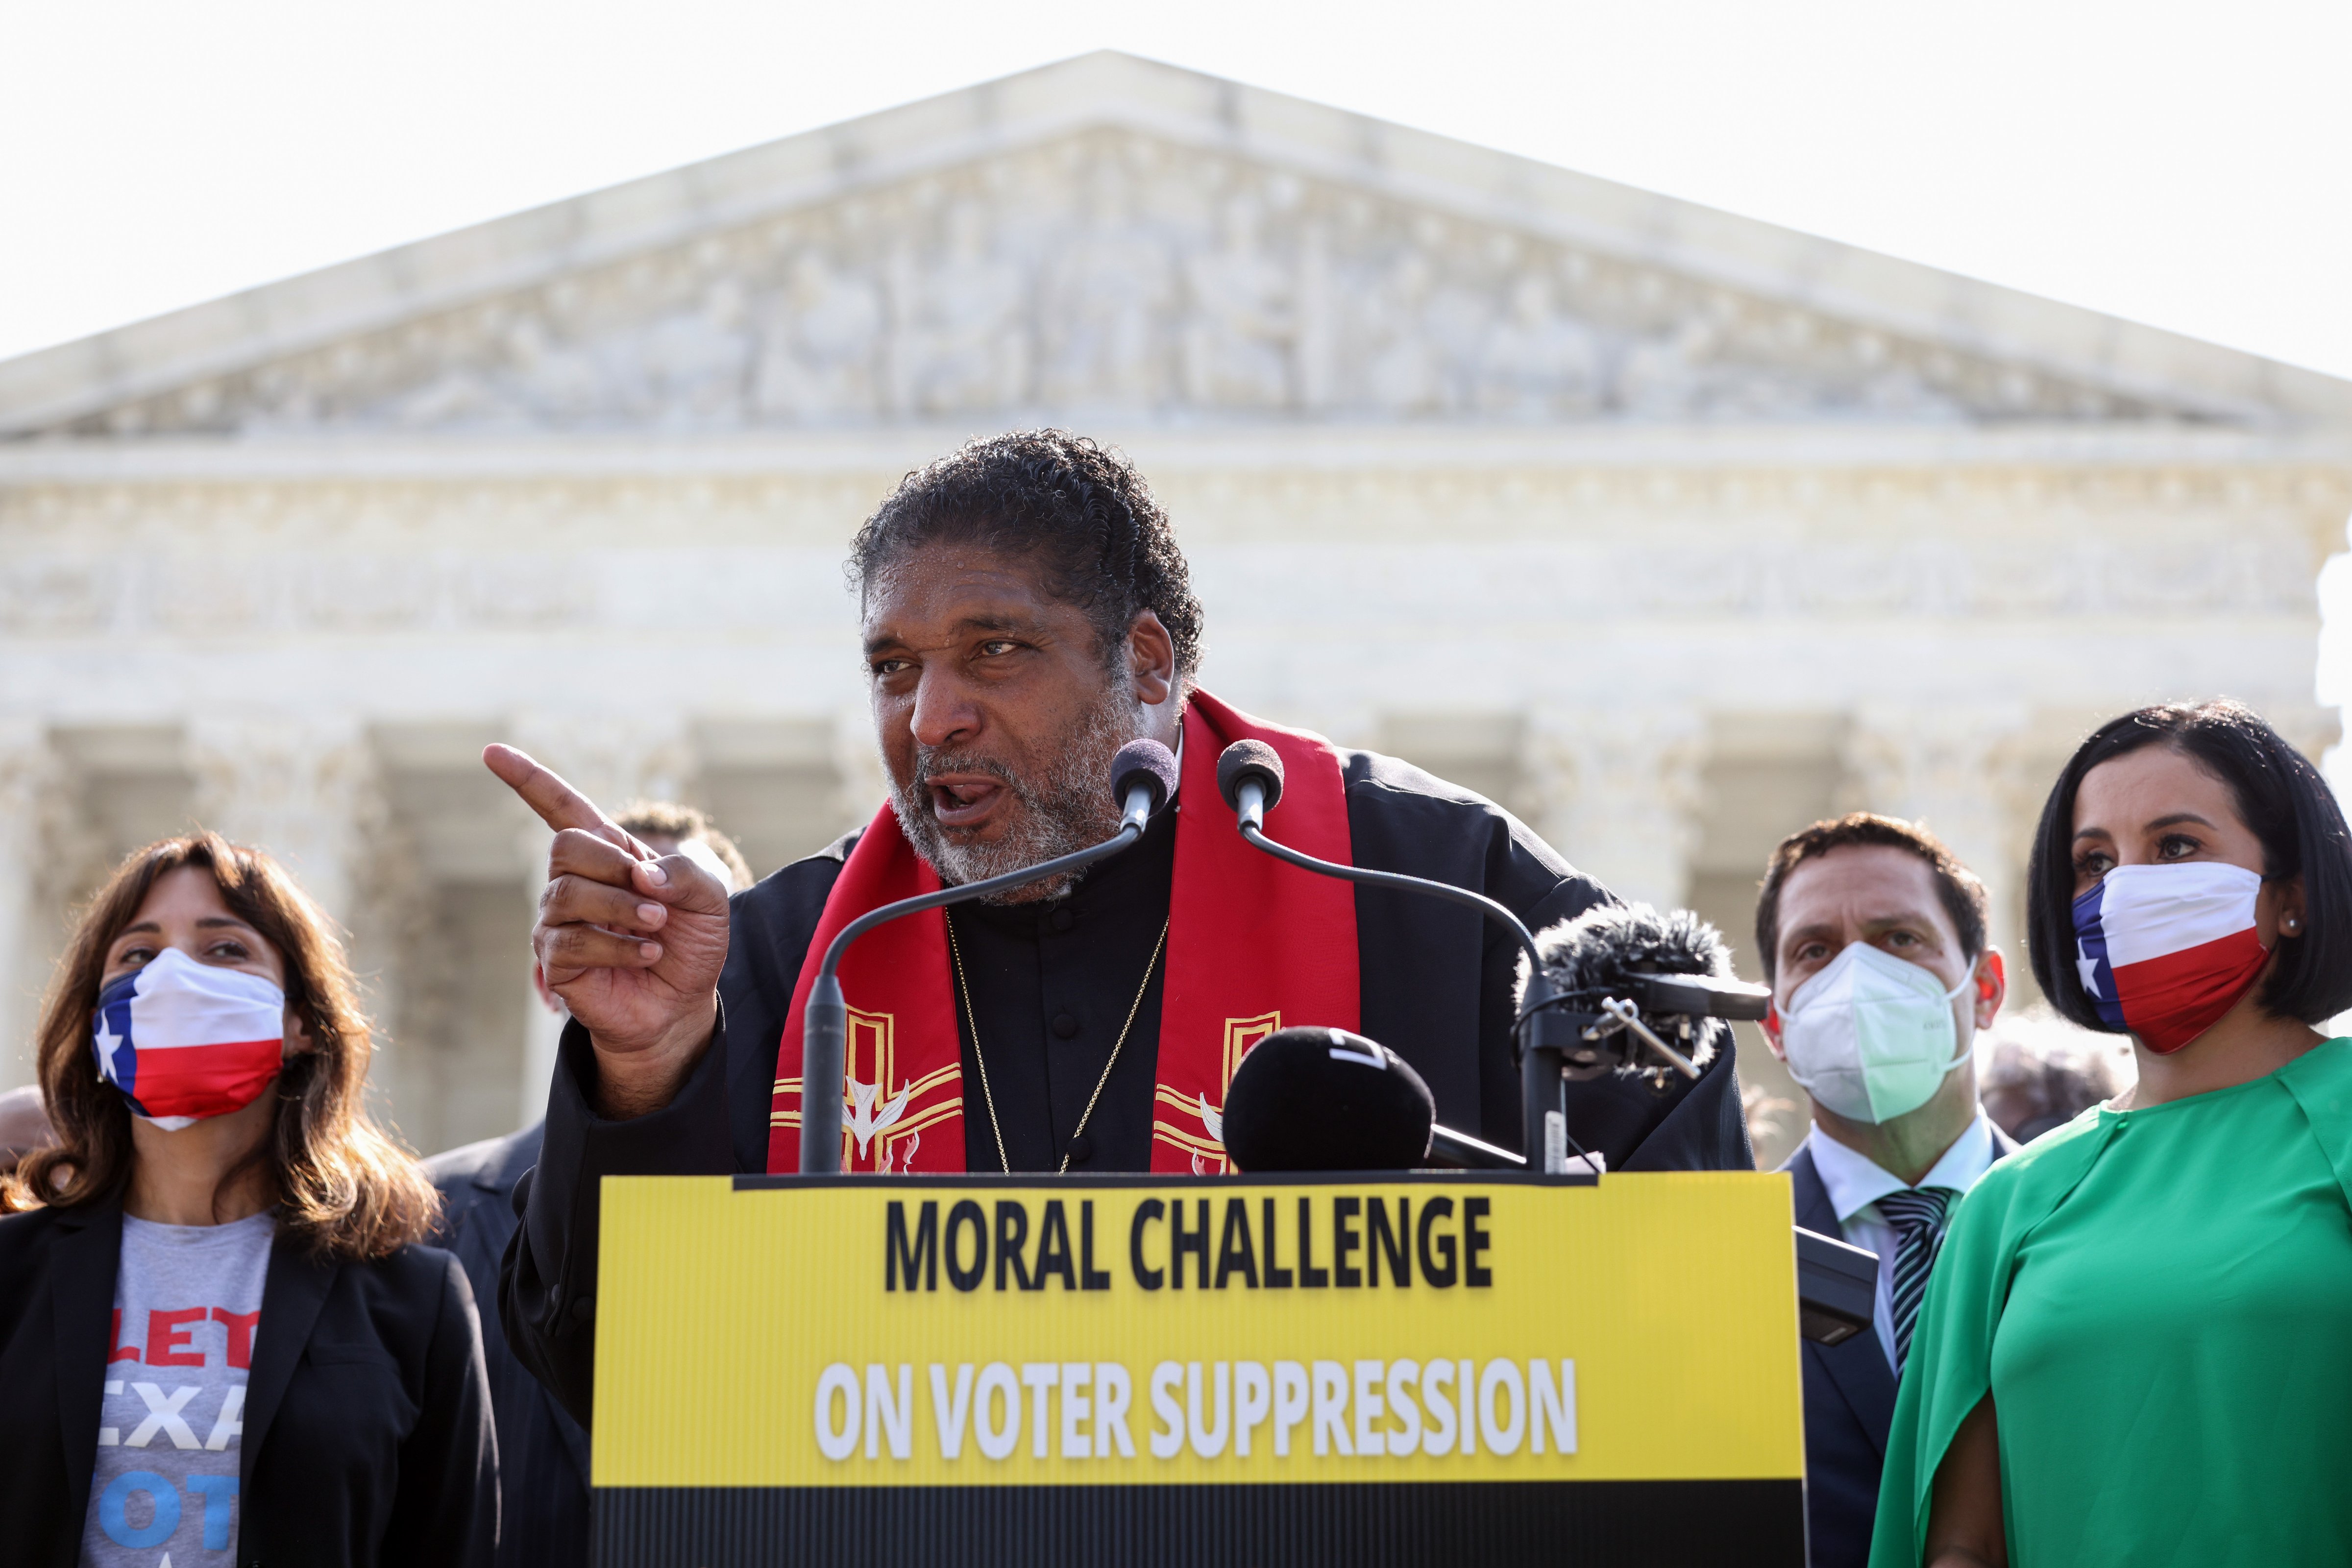 Rev. William Barber speaks alongside Texas lawmakers and fellow religious leaders, in Washington, D.C., on Aug. 12, 2021. (Kevin Dietsch/Getty Images)